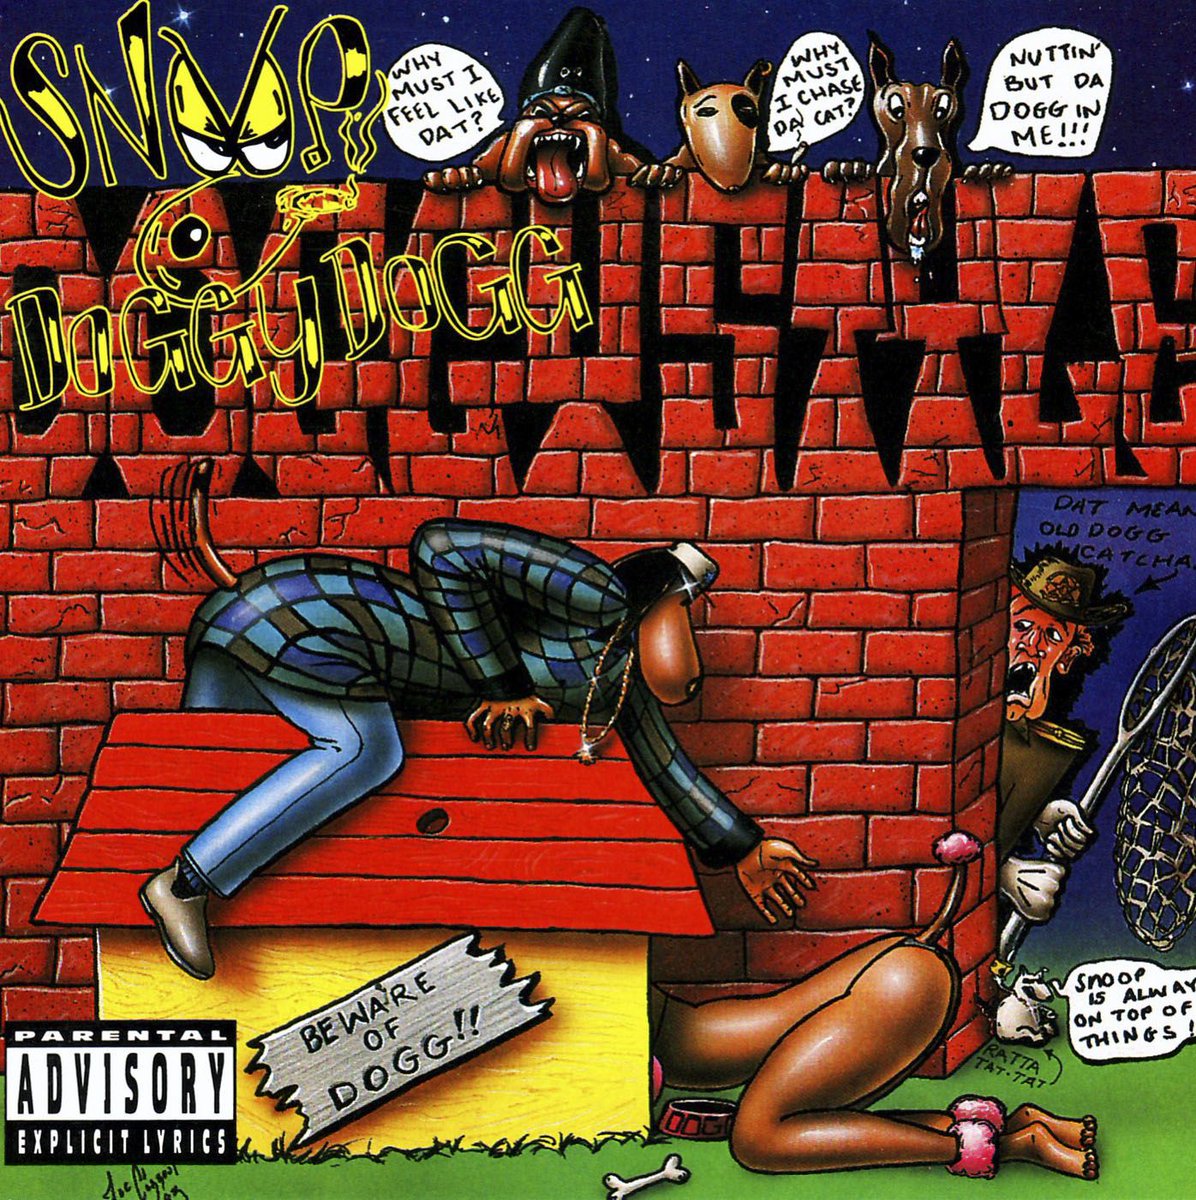 23 yrs old. Today. ????????✨???????? who got this ?? post a picc of ur album wit #Doggystyle23 n Imma follow some of u https://t.co/xePJzhXyZs